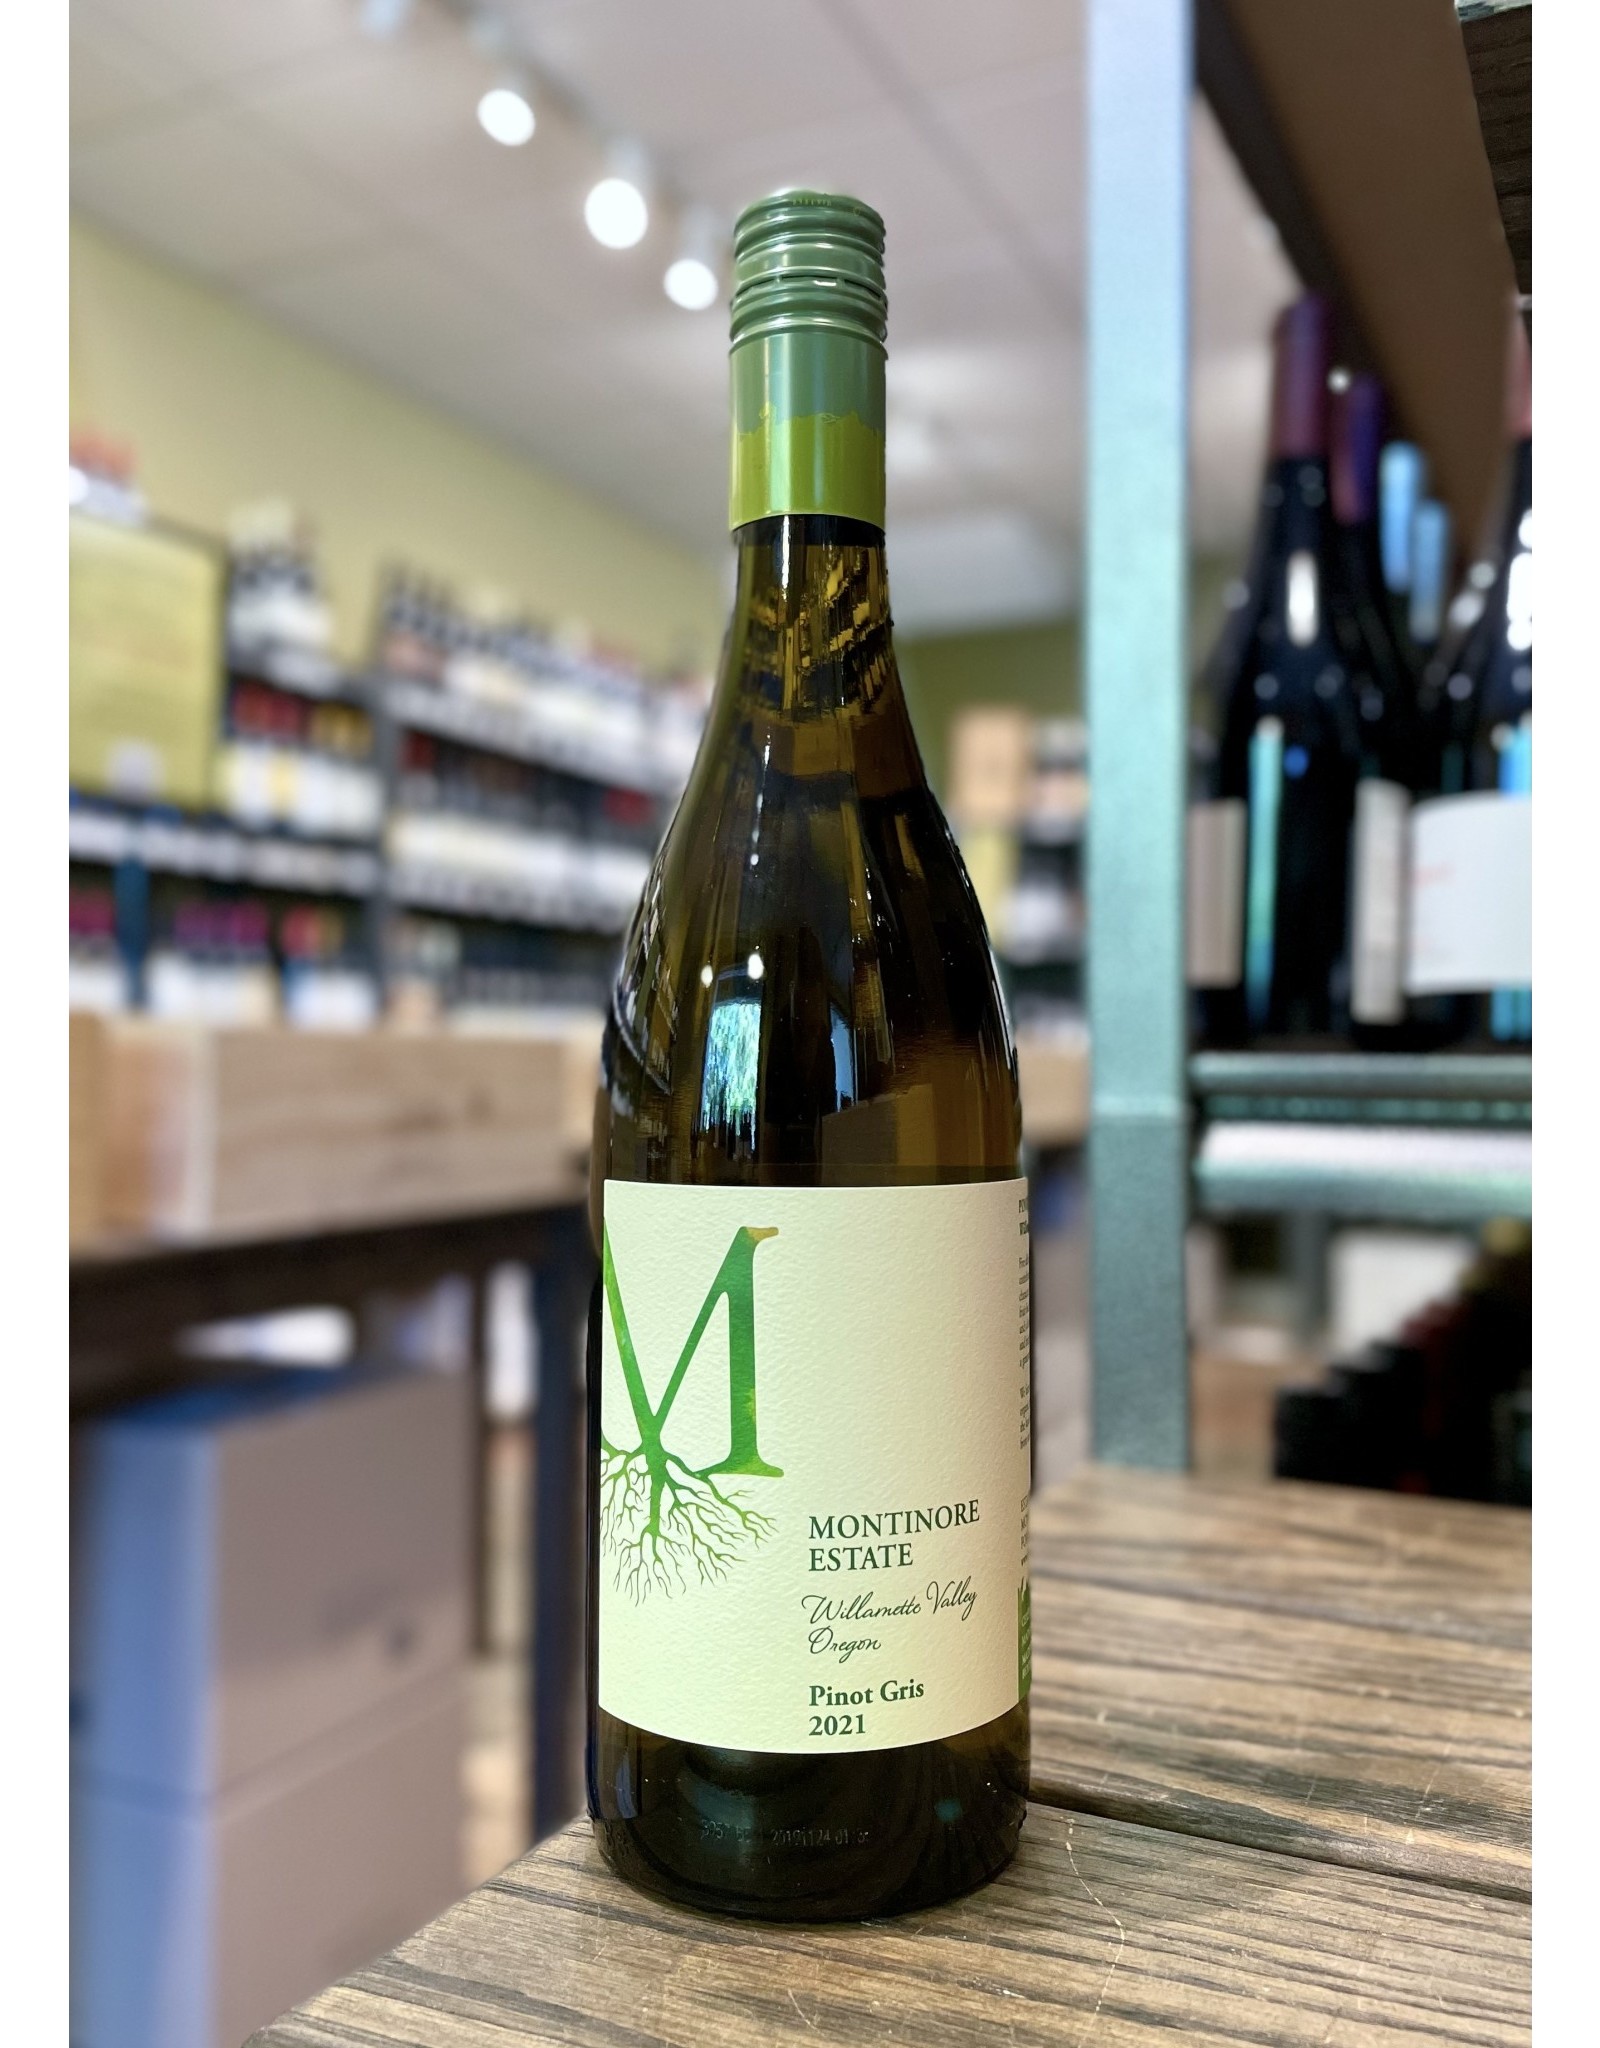 Montinore Pinot Gris 2021